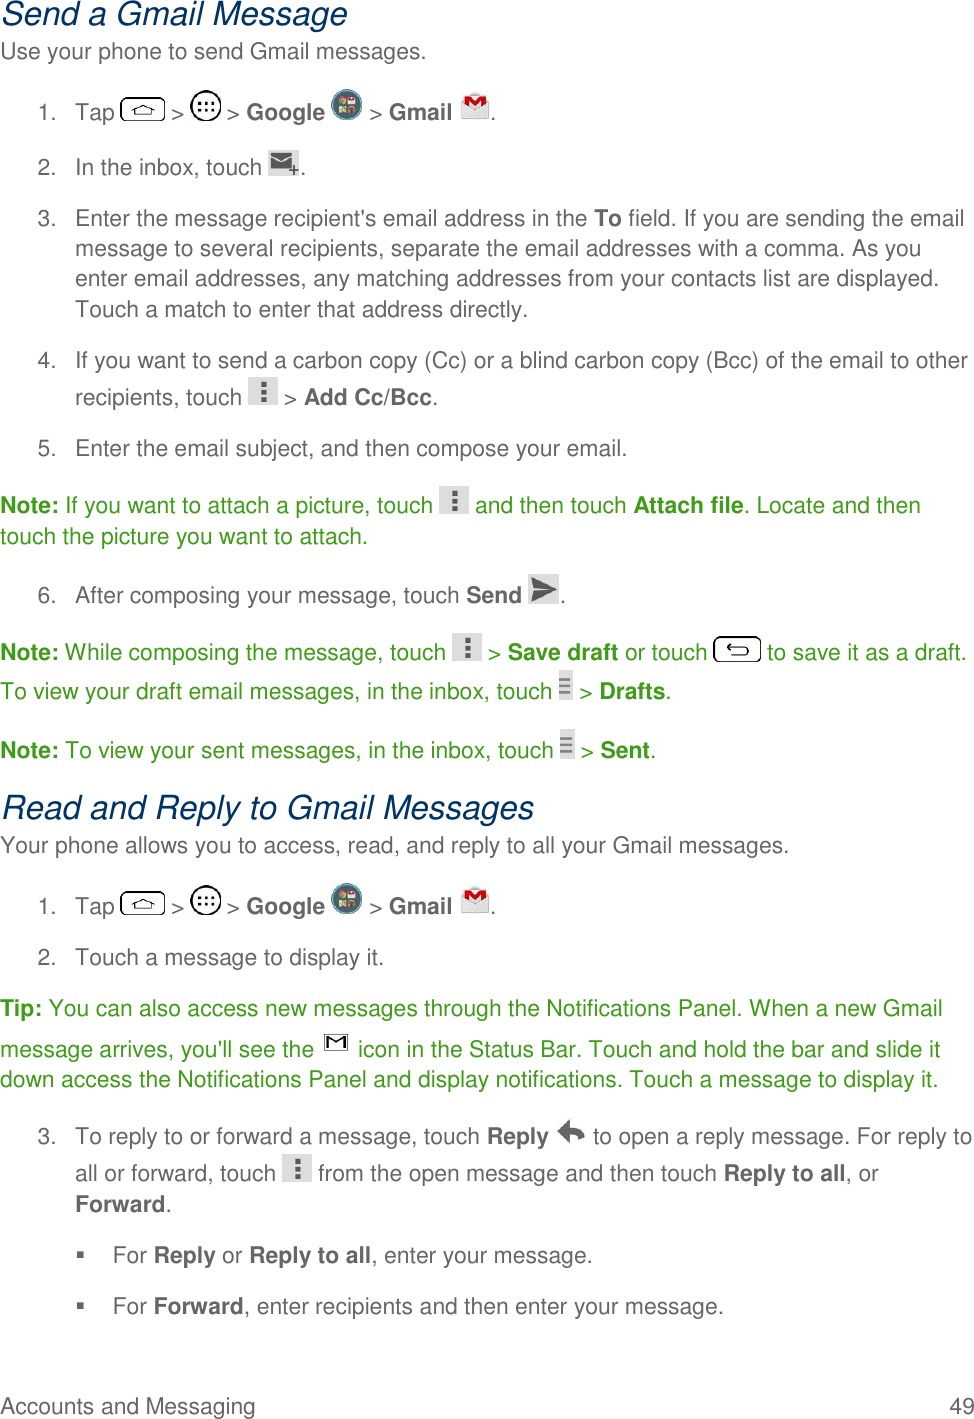 Accounts and Messaging  49 Send a Gmail Message Use your phone to send Gmail messages. 1.  Tap   &gt;   &gt; Google   &gt; Gmail  . 2.  In the inbox, touch  . 3.  Enter the message recipient&apos;s email address in the To field. If you are sending the email message to several recipients, separate the email addresses with a comma. As you enter email addresses, any matching addresses from your contacts list are displayed. Touch a match to enter that address directly. 4.  If you want to send a carbon copy (Cc) or a blind carbon copy (Bcc) of the email to other recipients, touch   &gt; Add Cc/Bcc. 5.  Enter the email subject, and then compose your email. Note: If you want to attach a picture, touch   and then touch Attach file. Locate and then touch the picture you want to attach. 6.  After composing your message, touch Send  . Note: While composing the message, touch   &gt; Save draft or touch   to save it as a draft. To view your draft email messages, in the inbox, touch   &gt; Drafts. Note: To view your sent messages, in the inbox, touch   &gt; Sent. Read and Reply to Gmail Messages Your phone allows you to access, read, and reply to all your Gmail messages. 1.  Tap   &gt;   &gt; Google   &gt; Gmail  . 2.  Touch a message to display it. Tip: You can also access new messages through the Notifications Panel. When a new Gmail message arrives, you&apos;ll see the   icon in the Status Bar. Touch and hold the bar and slide it down access the Notifications Panel and display notifications. Touch a message to display it.  3.  To reply to or forward a message, touch Reply   to open a reply message. For reply to all or forward, touch   from the open message and then touch Reply to all, or Forward.   For Reply or Reply to all, enter your message.   For Forward, enter recipients and then enter your message. 